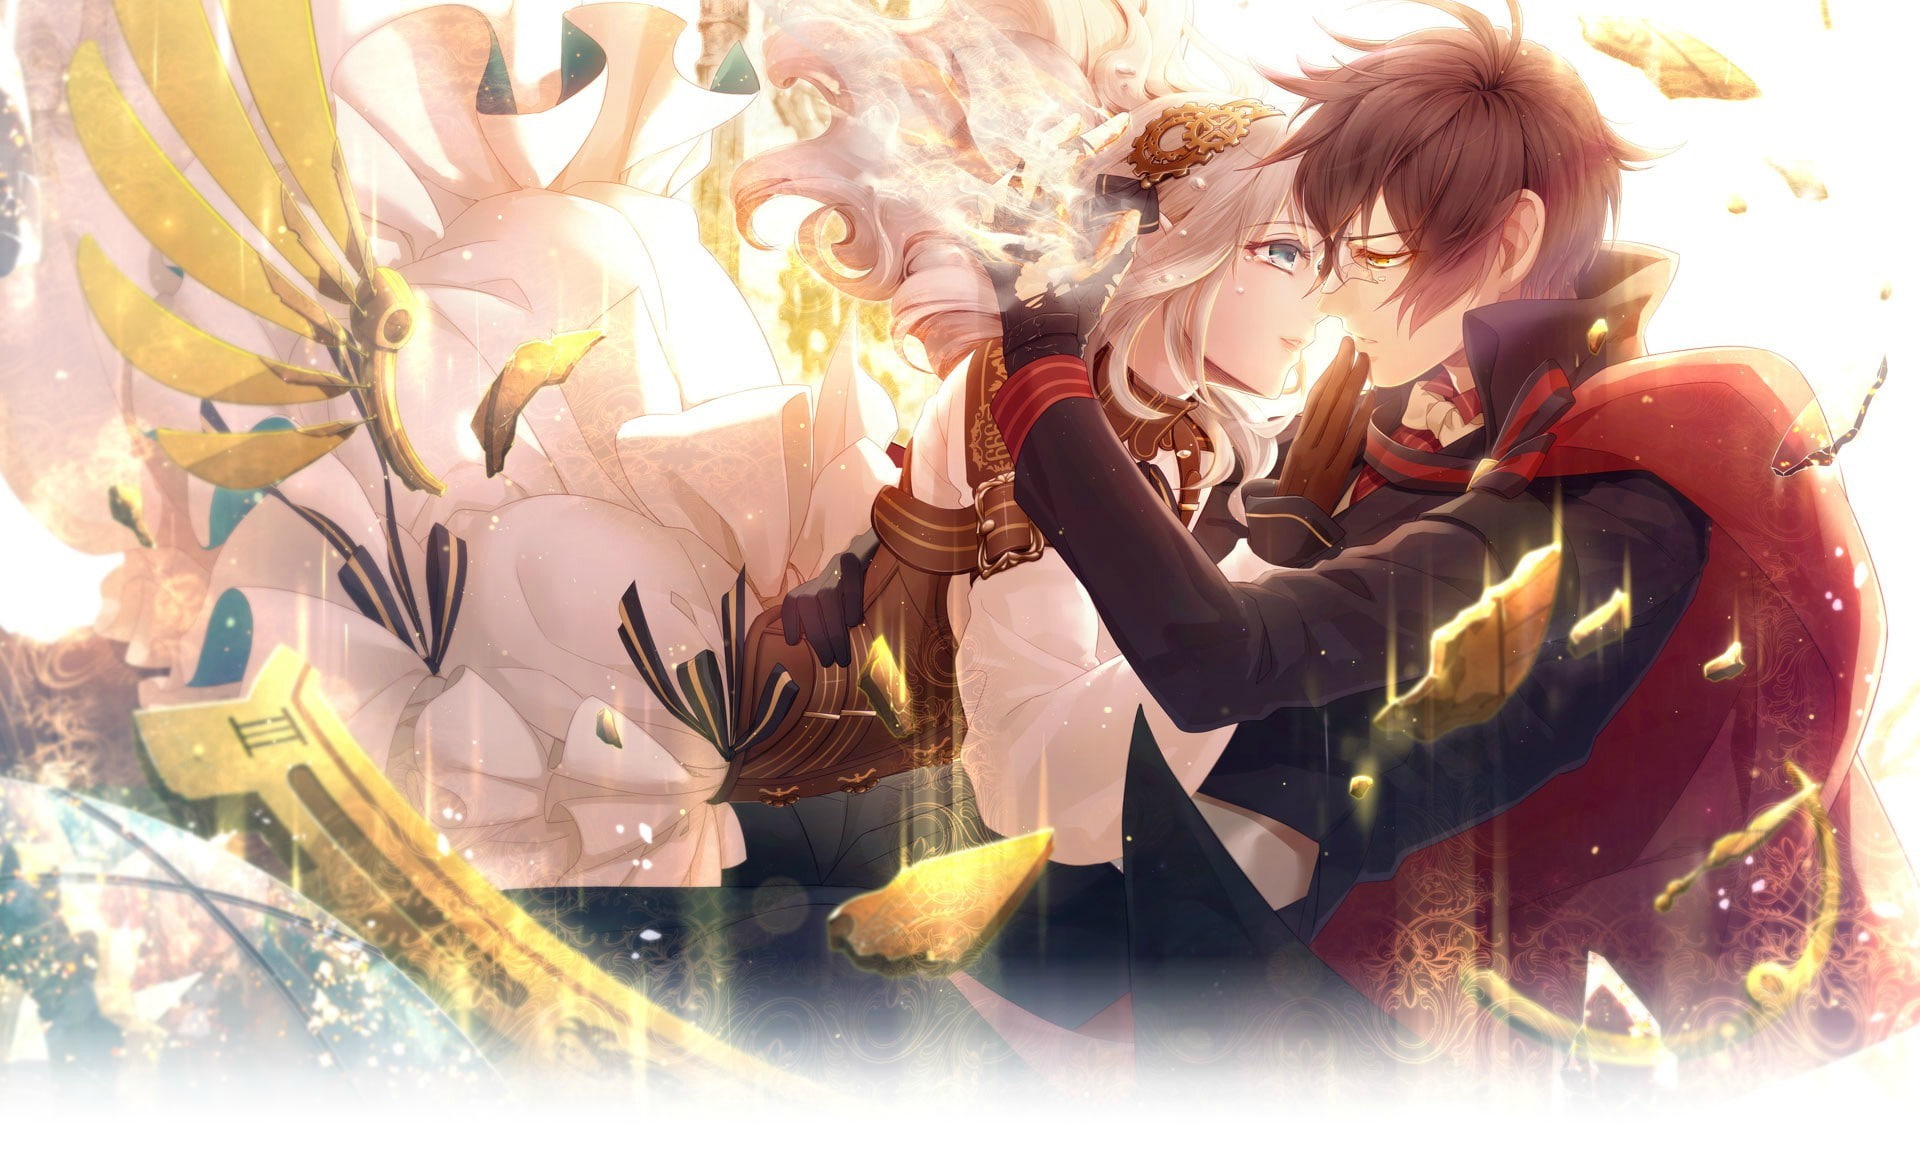 code realize, real people, representation, art and craft, one person